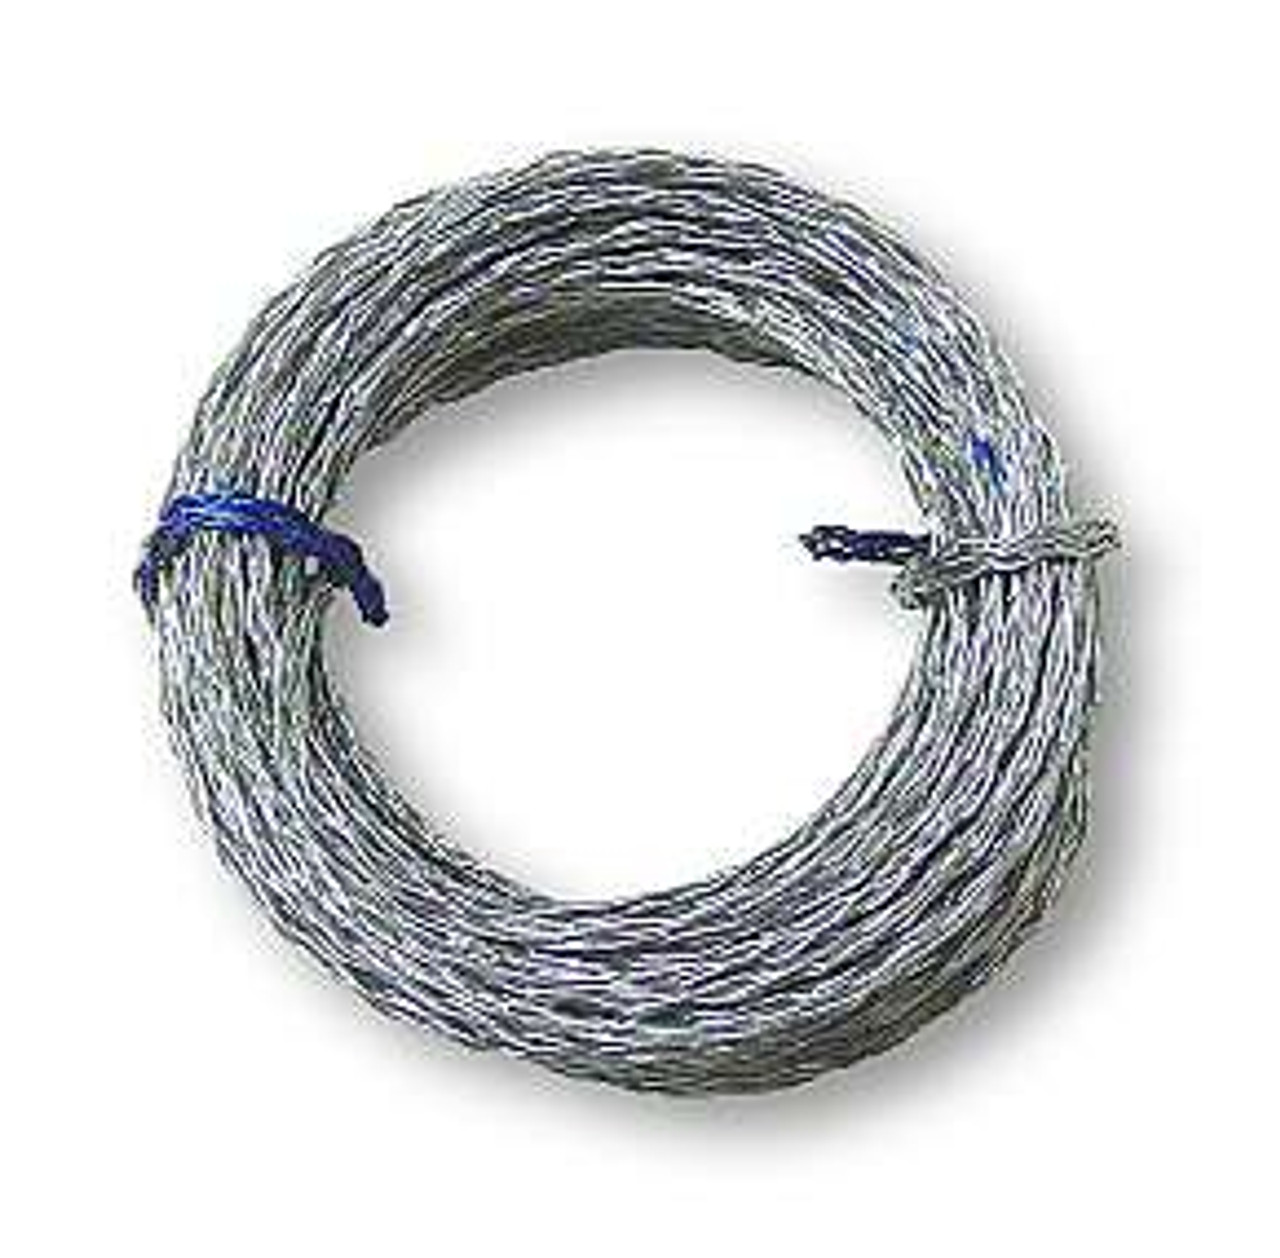 Bulldog Picture Wire 15 Lb 15 Feet Roll AM-235620 - D. Lawless Hardware